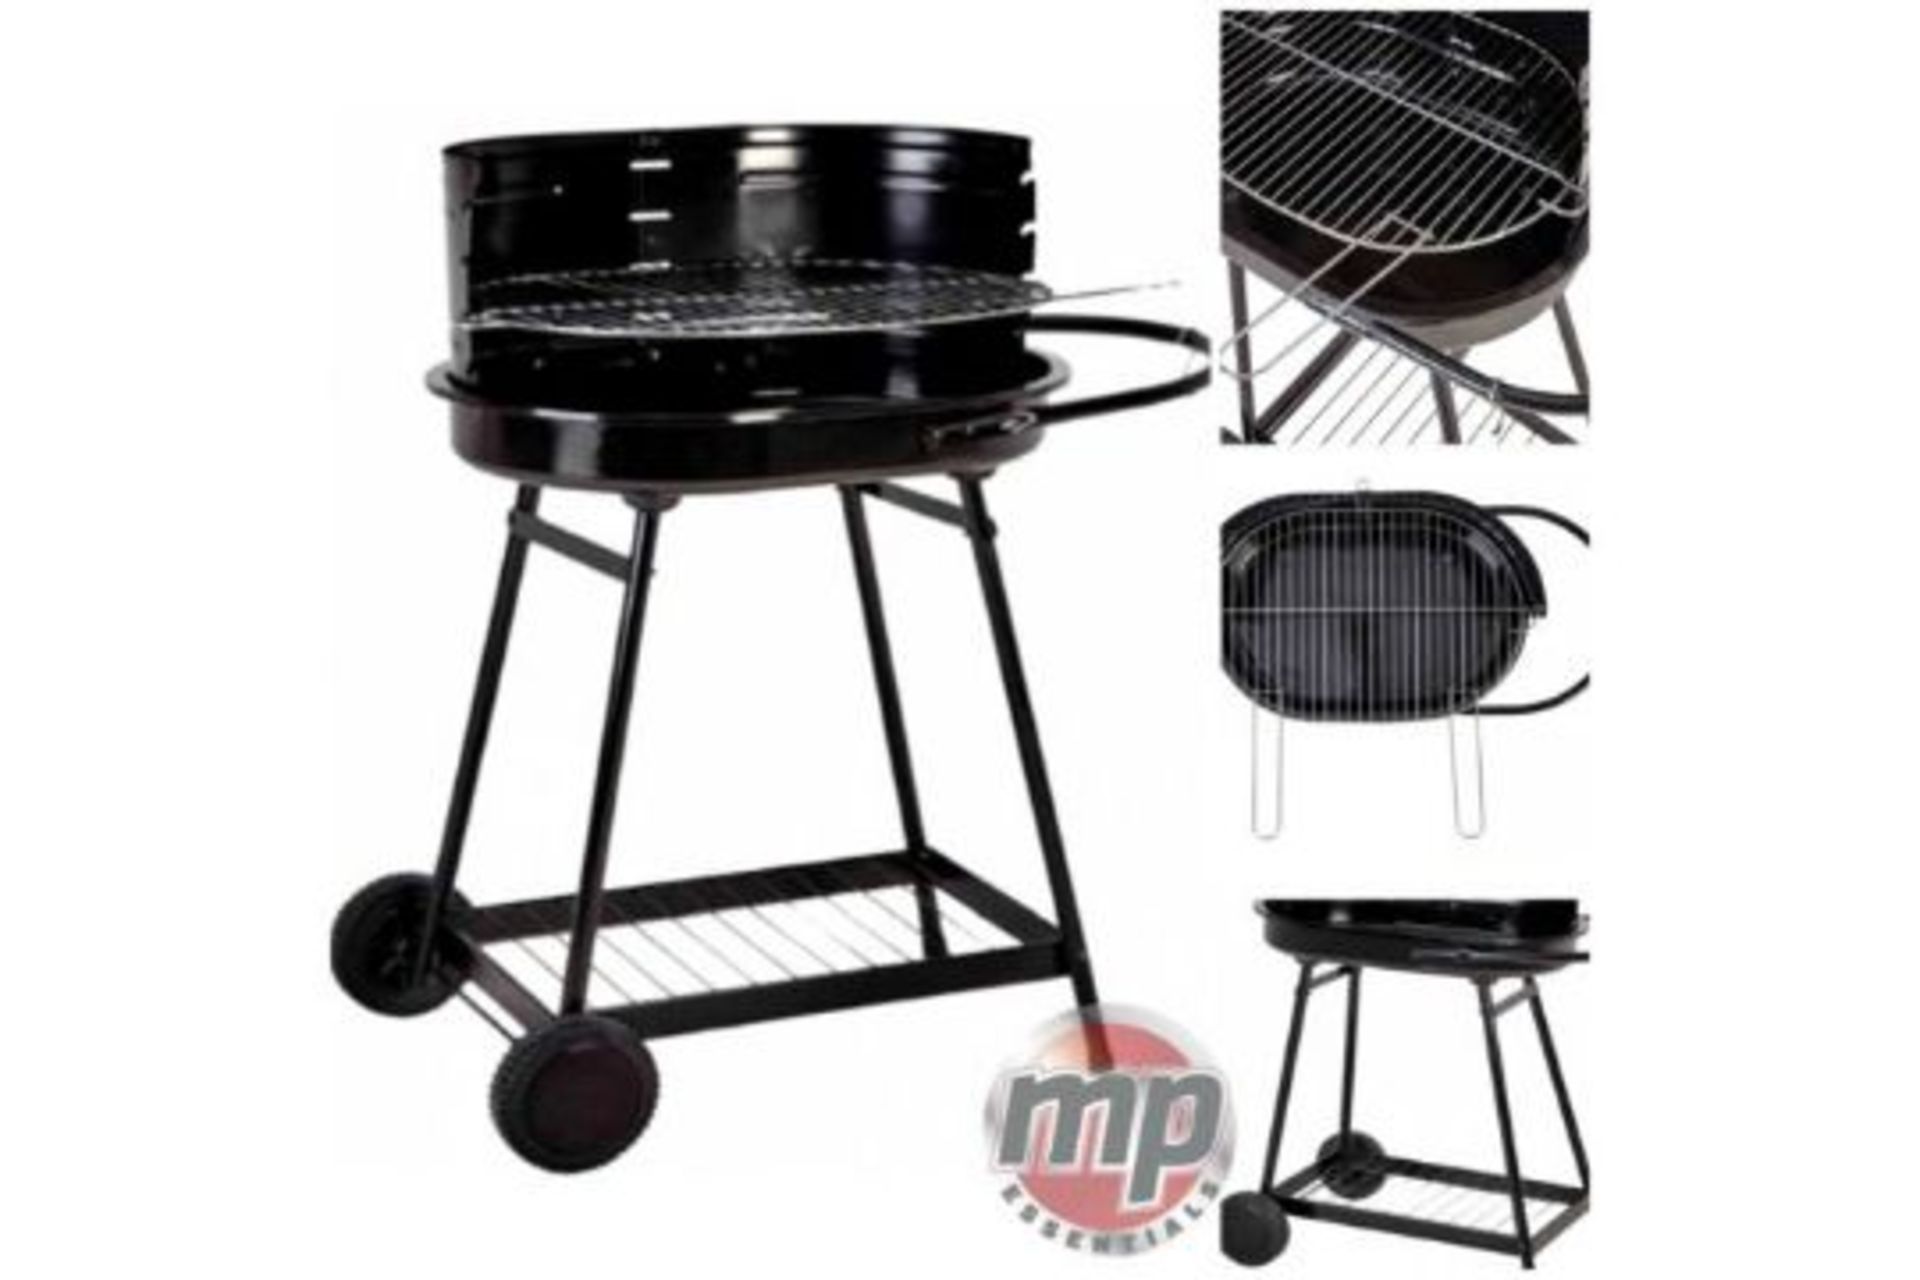 3 X BRAND NEW BOXED BARREN PORTABLE CHARCOAL TROLLEY BARBEQUE OUTDOOR GRILL WITH WHEELS BLACK RRP £